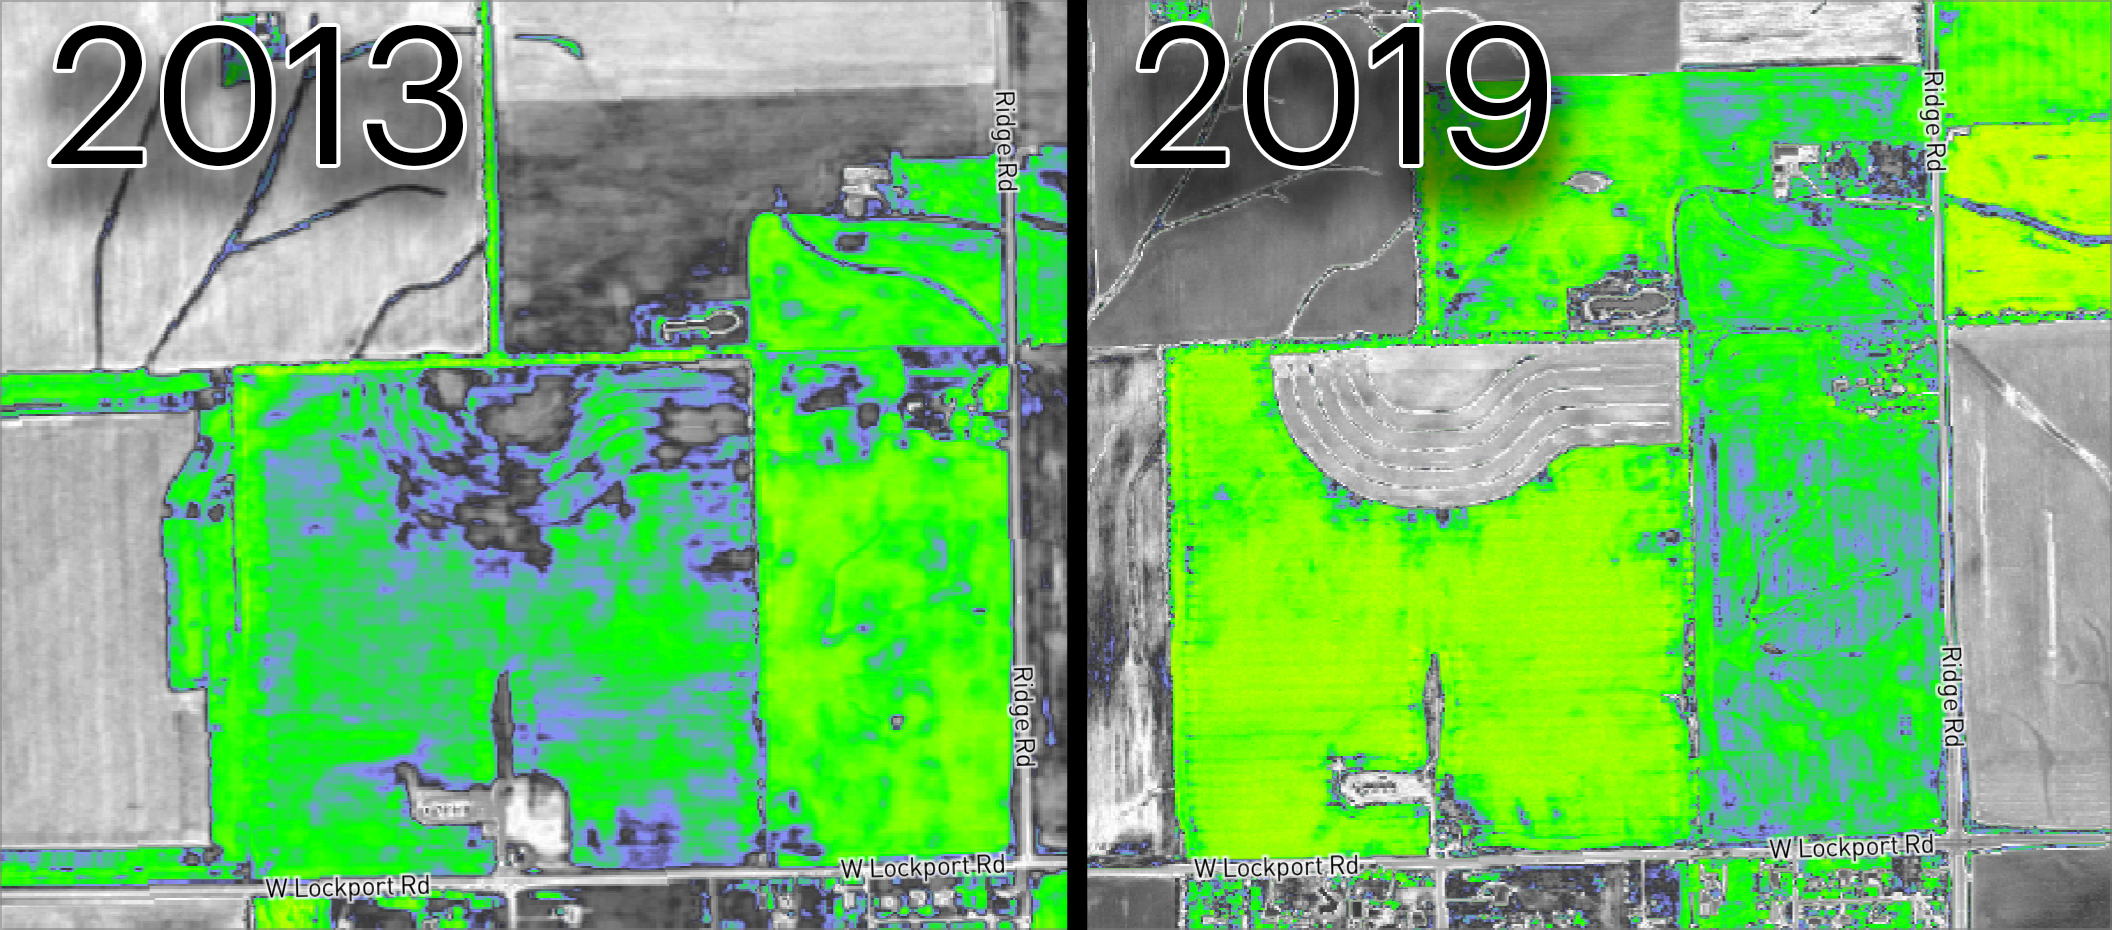 The subject area compared in the NDVI preset. 2013 (Left) versus 2019 (Right)